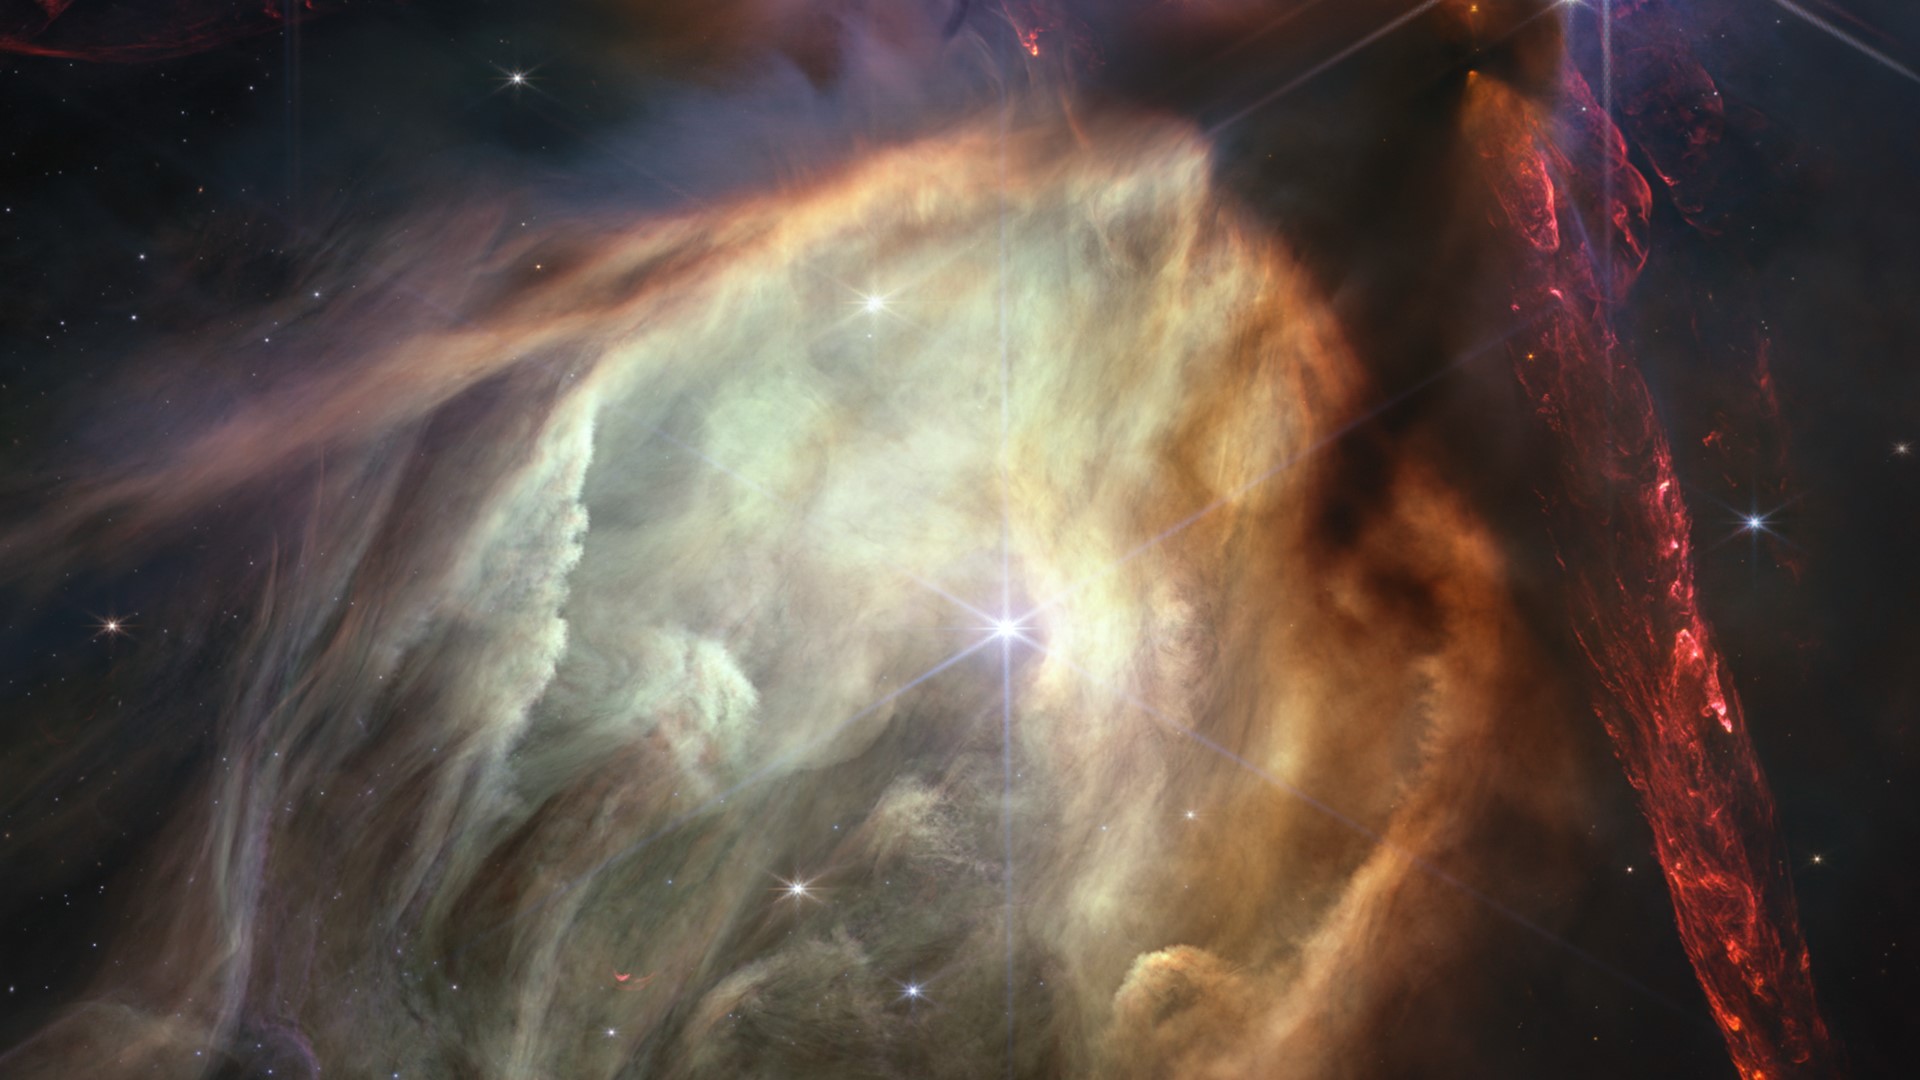 The Webb Space Telescope is giving the world a look at a star birth like it’s never been seen before.